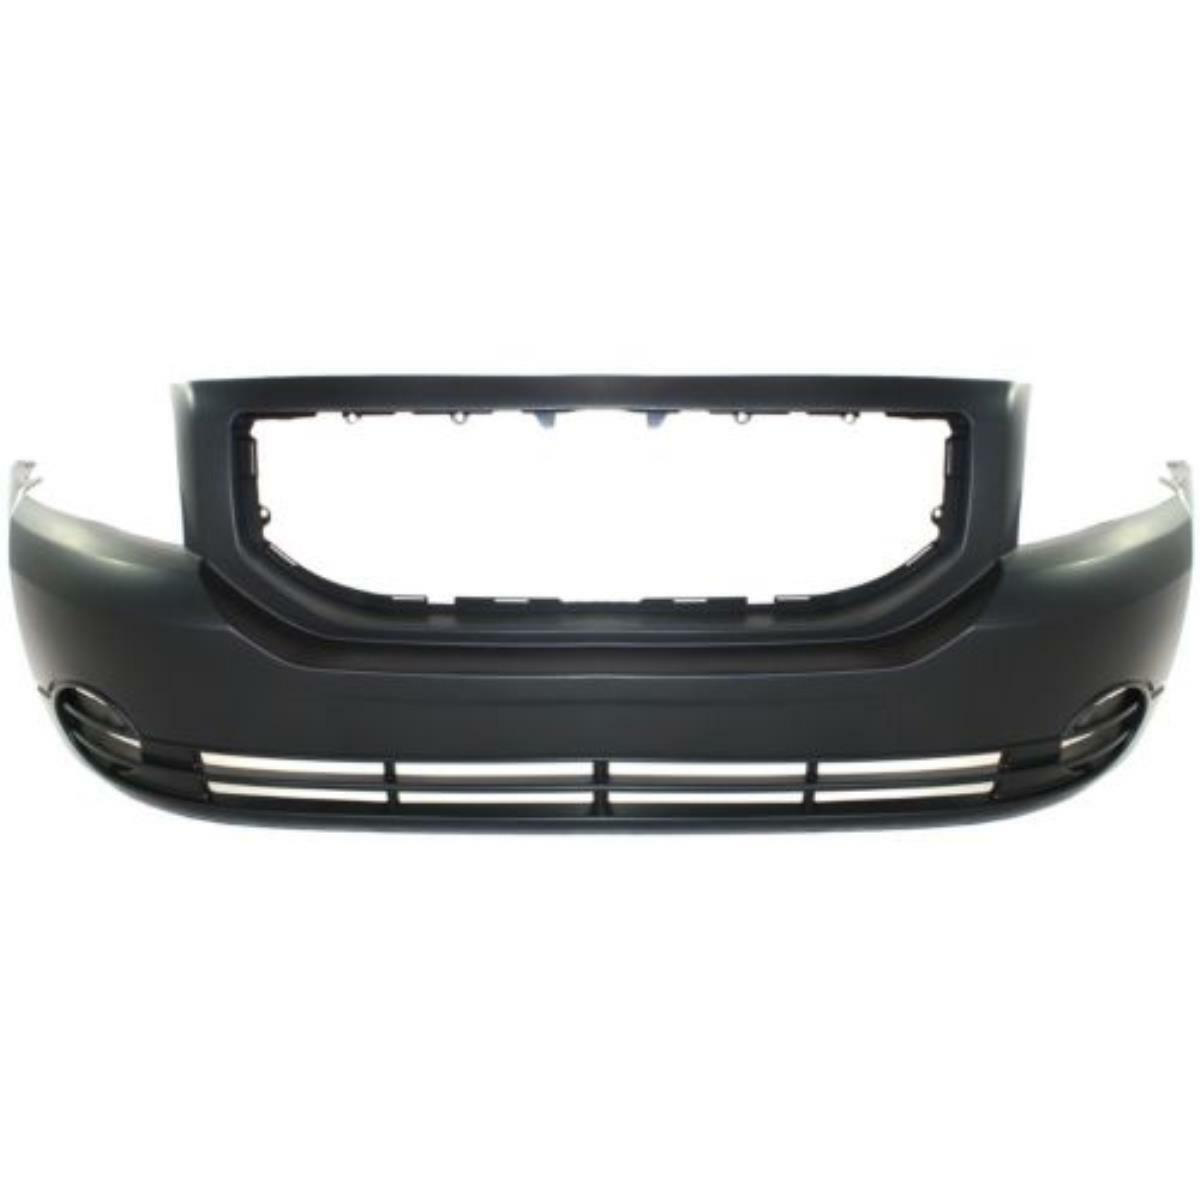 2007-2012 Dodge Caliber (No Fogs) Front Bumper Painted to Match